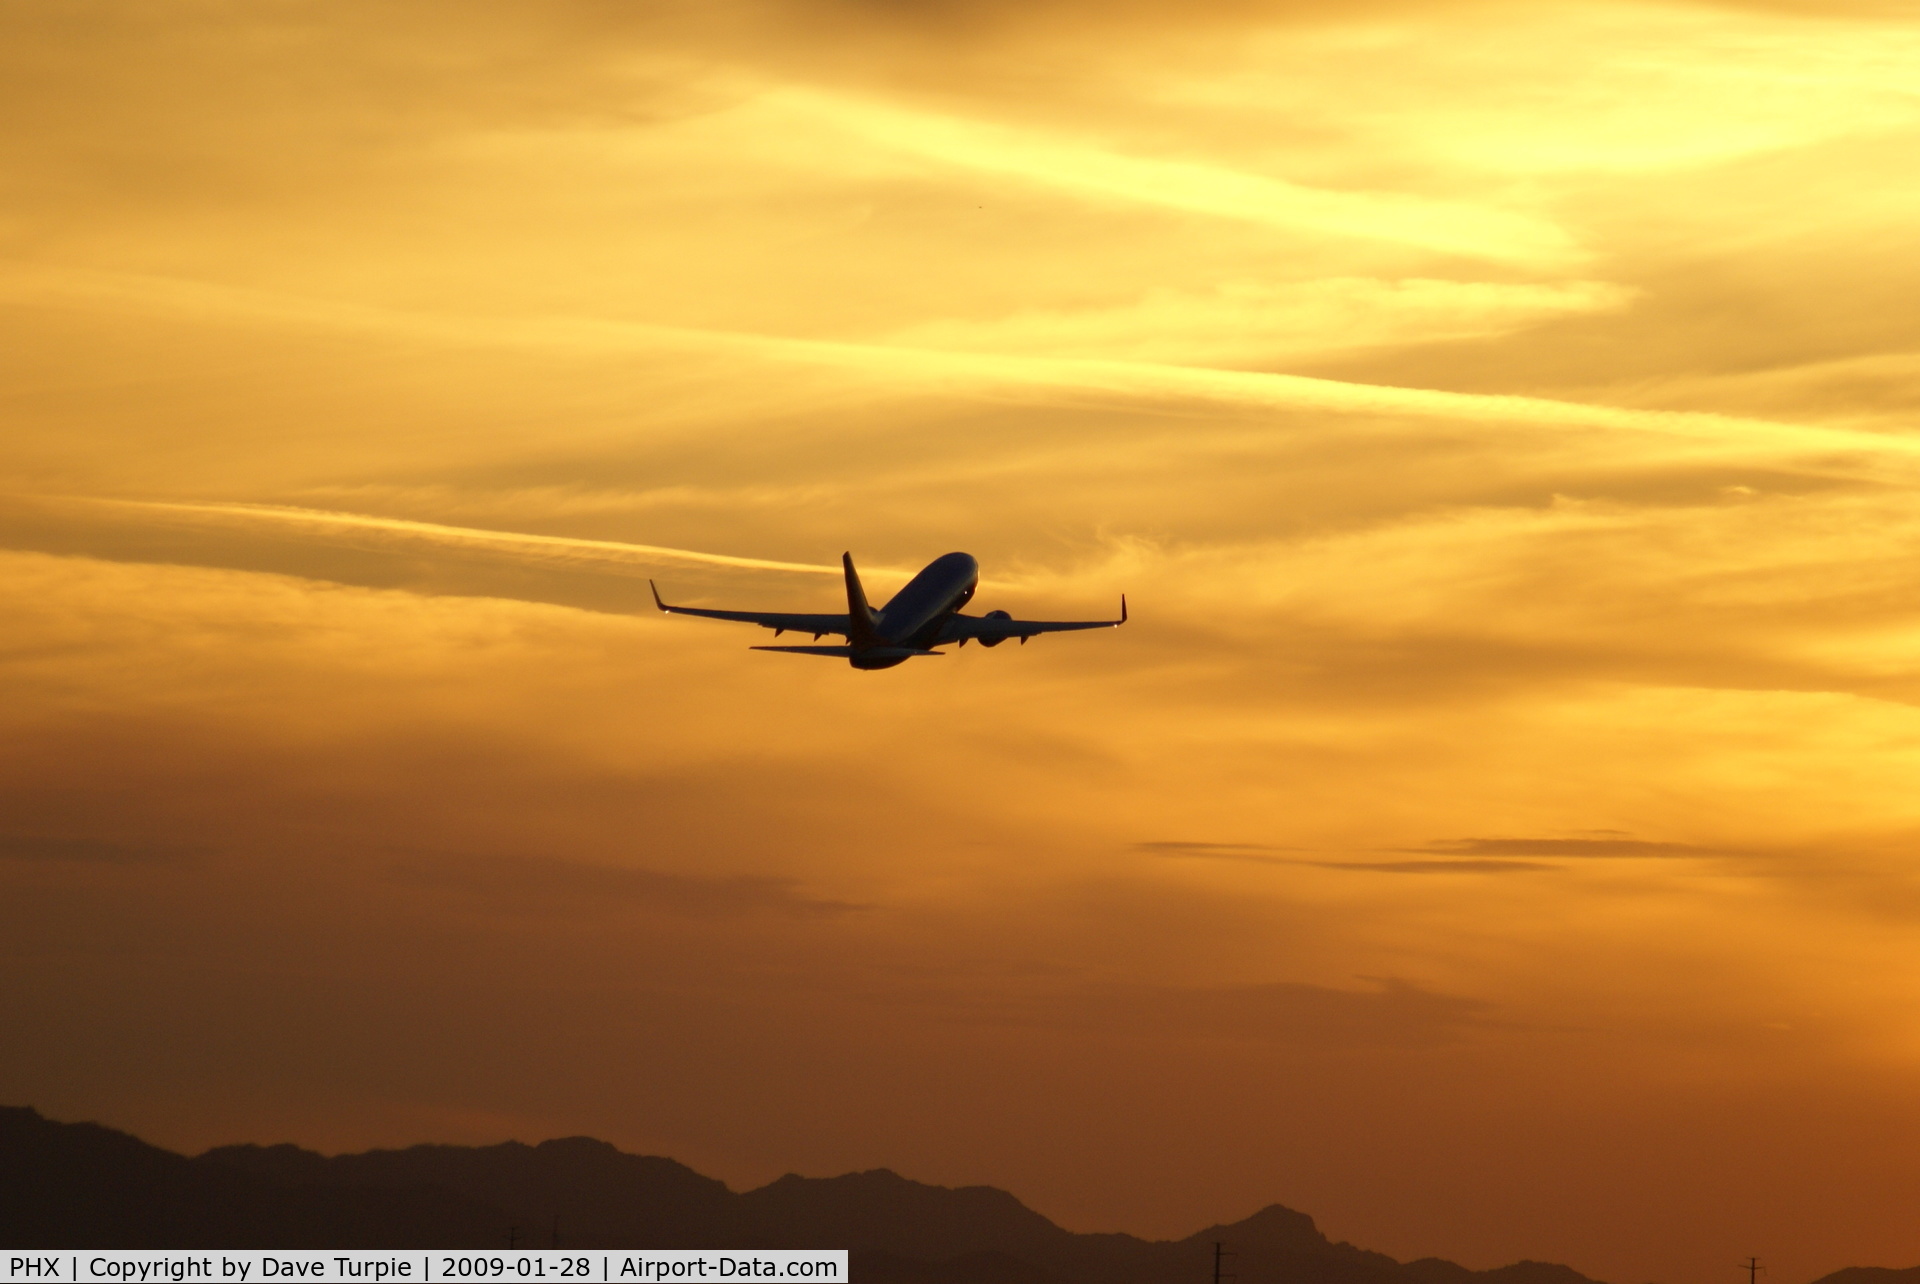 Phoenix Sky Harbor International Airport (PHX) - Another sunset picture from KPHX.